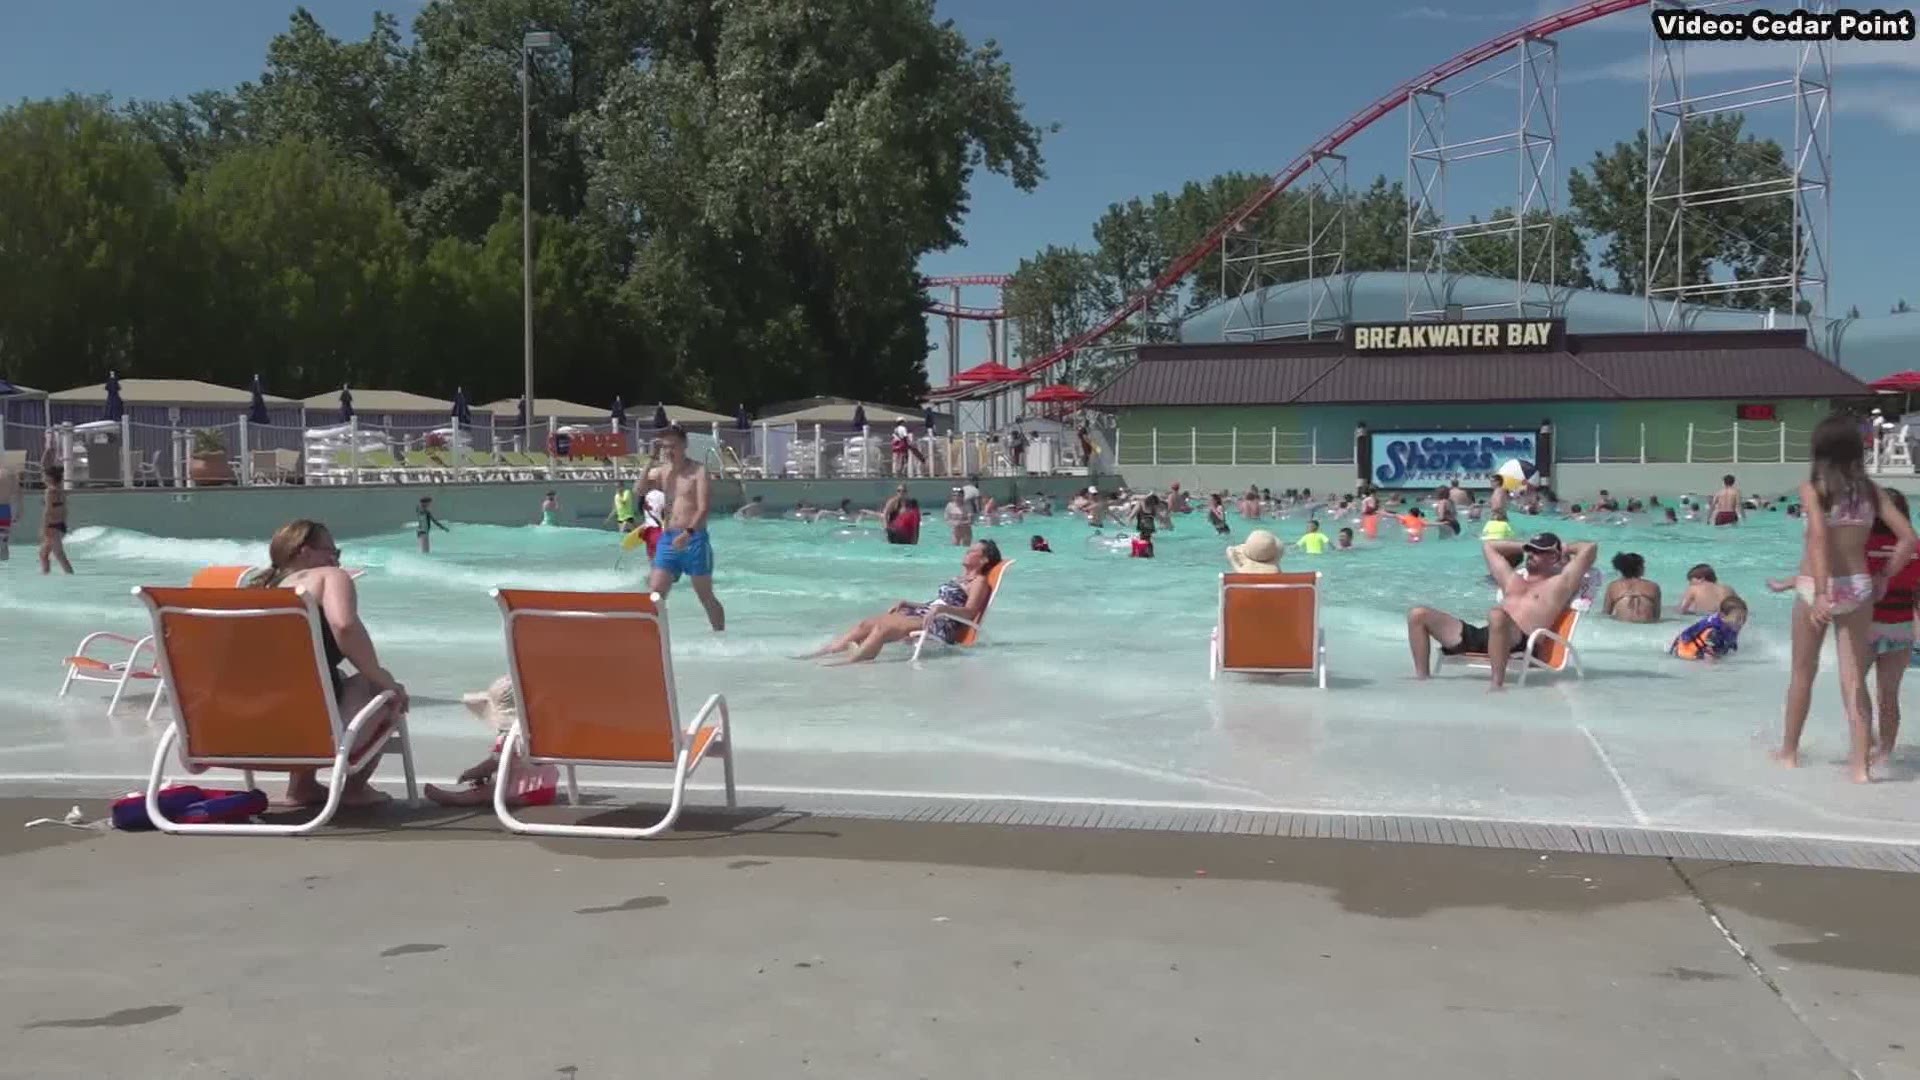 Here's a peek inside the Cedar Point Shores water parks and its attractions.